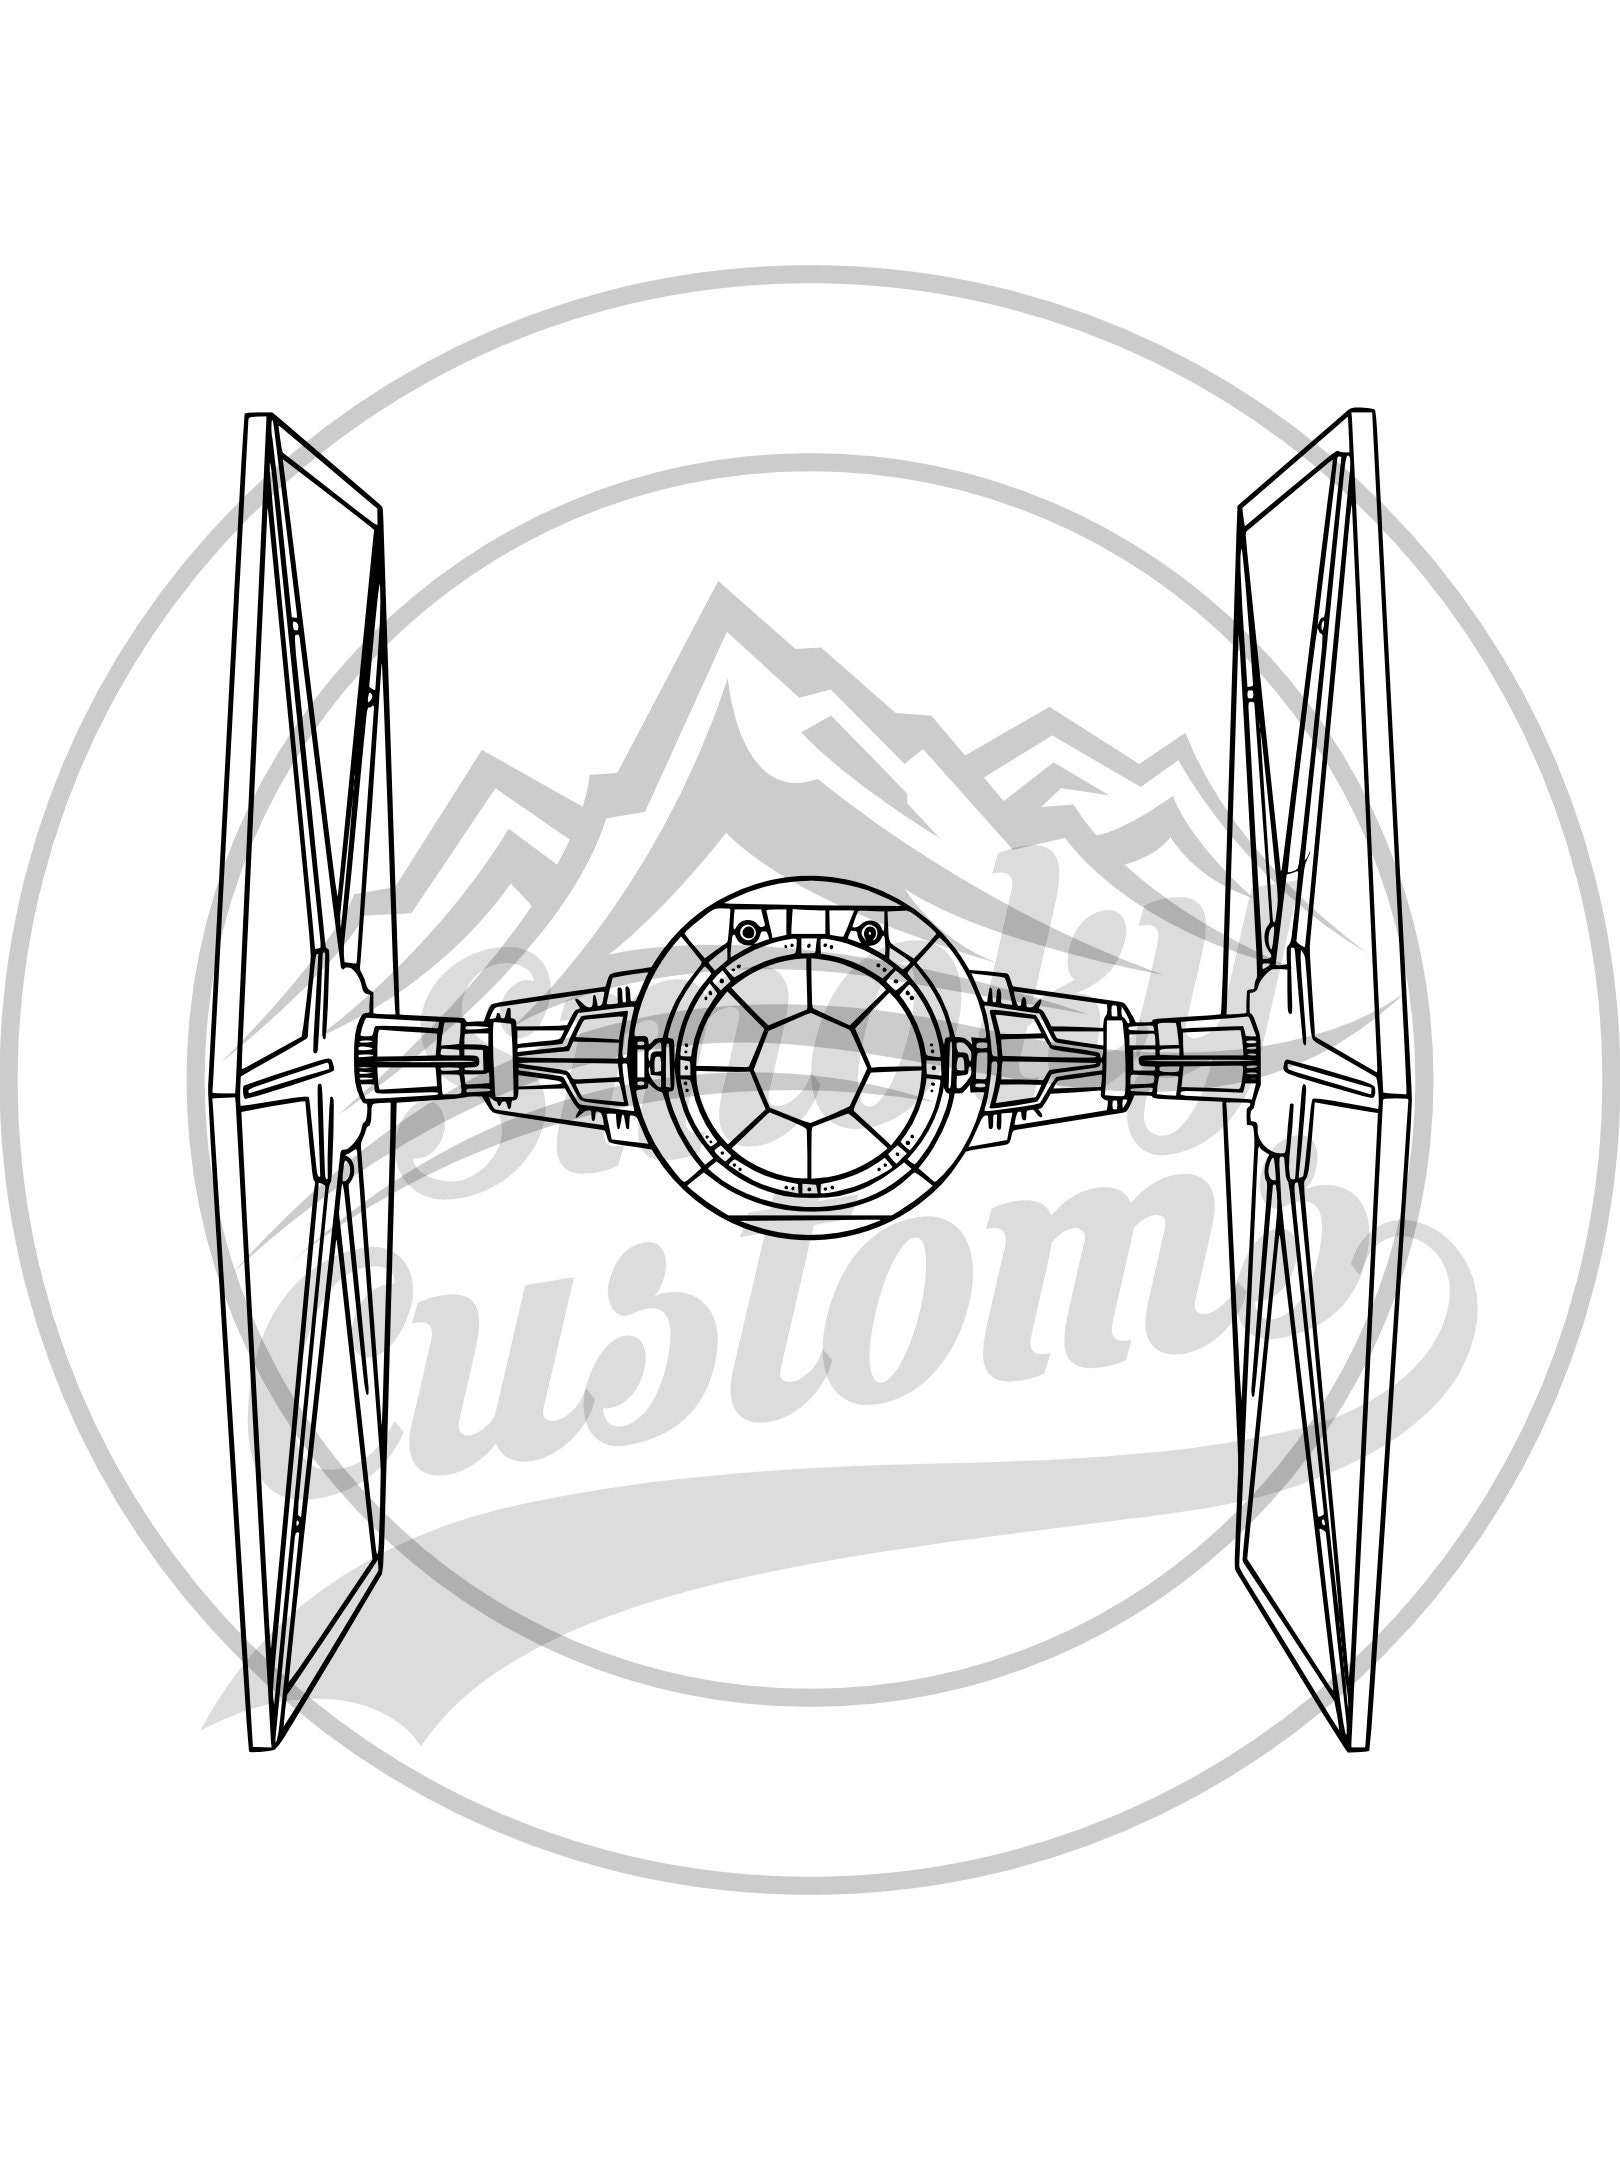 Tie fighter hand drawn ready to cut and print svg png jpg